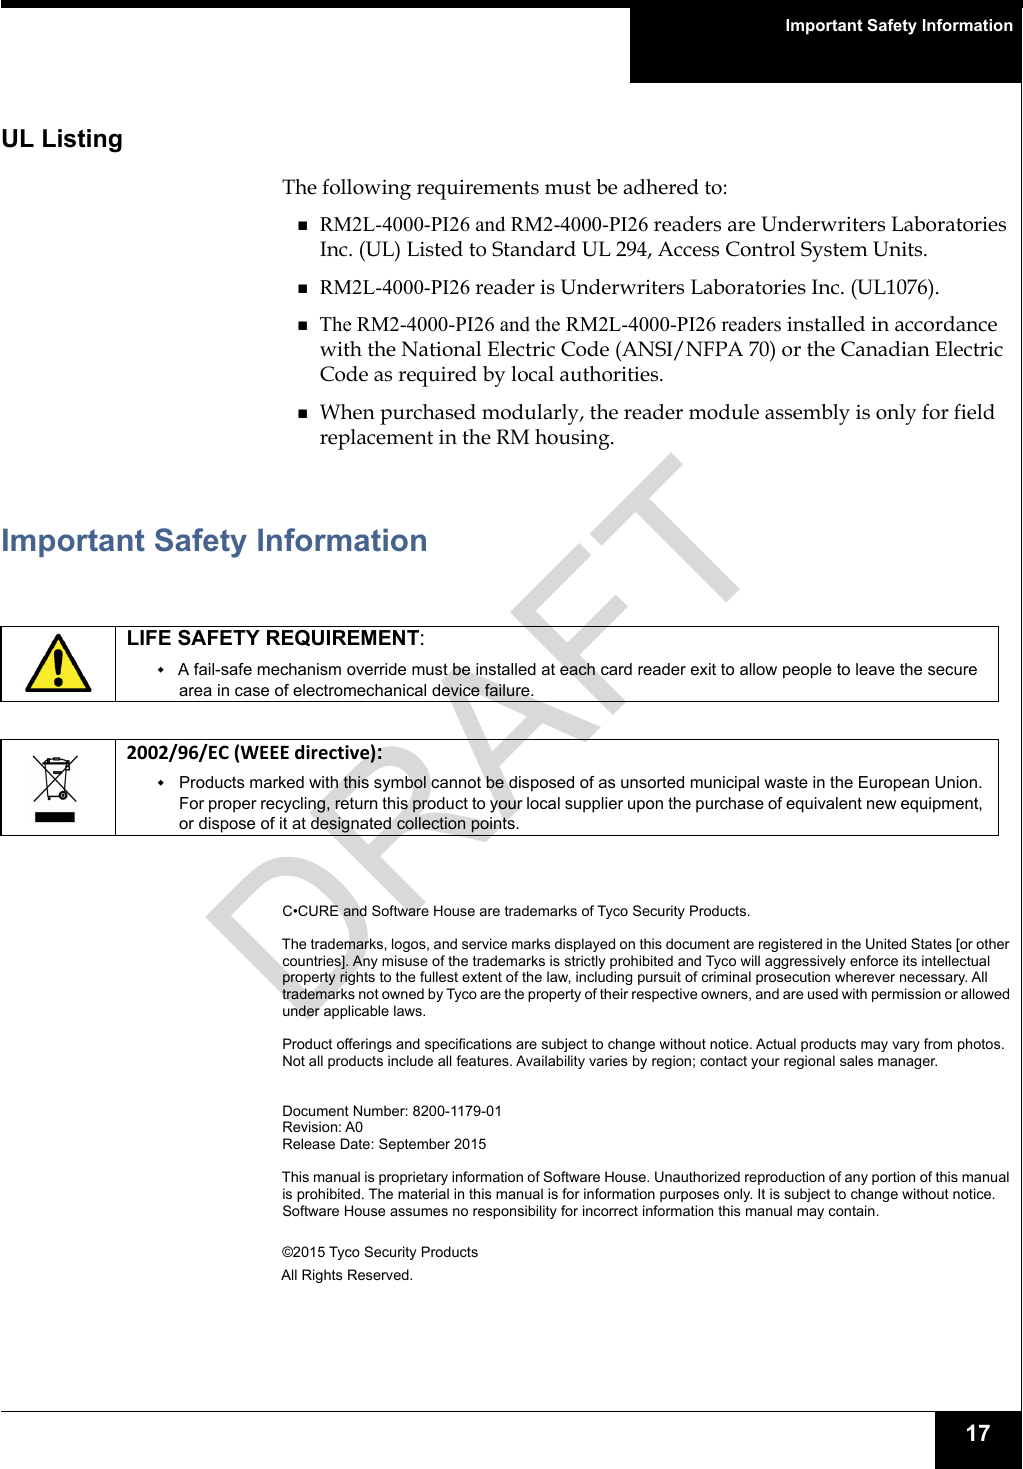 Important Safety Information17UL ListingThe following requirements must be adhered to:RM2L-4000-PI26 and RM2-4000-PI26 readers are Underwriters Laboratories Inc. (UL) Listed to Standard UL 294, Access Control System Units. RM2L-4000-PI26 reader is Underwriters Laboratories Inc. (UL1076). The RM2-4000-PI26 and the RM2L-4000-PI26 readers installed in accordance with the National Electric Code (ANSI/NFPA 70) or the Canadian Electric Code as required by local authorities.When purchased modularly, the reader module assembly is only for field replacement in the RM housing.Important Safety InformationC•CURE and Software House are trademarks of Tyco Security Products.The trademarks, logos, and service marks displayed on this document are registered in the United States [or other countries]. Any misuse of the trademarks is strictly prohibited and Tyco will aggressively enforce its intellectual property rights to the fullest extent of the law, including pursuit of criminal prosecution wherever necessary. All trademarks not owned by Tyco are the property of their respective owners, and are used with permission or allowed under applicable laws. Product offerings and specifications are subject to change without notice. Actual products may vary from photos. Not all products include all features. Availability varies by region; contact your regional sales manager.Document Number: 8200-1179-01Revision: A0Release Date: September 2015This manual is proprietary information of Software House. Unauthorized reproduction of any portion of this manual is prohibited. The material in this manual is for information purposes only. It is subject to change without notice. Software House assumes no responsibility for incorrect information this manual may contain. ©2015 Tyco Security ProductsAll Rights Reserved.LIFE SAFETY REQUIREMENT:A fail-safe mechanism override must be installed at each card reader exit to allow people to leave the secure area in case of electromechanical device failure.2002/96/EC (WEEE directive): Products marked with this symbol cannot be disposed of as unsorted municipal waste in the European Union. For proper recycling, return this product to your local supplier upon the purchase of equivalent new equipment, or dispose of it at designated collection points.DRAFT